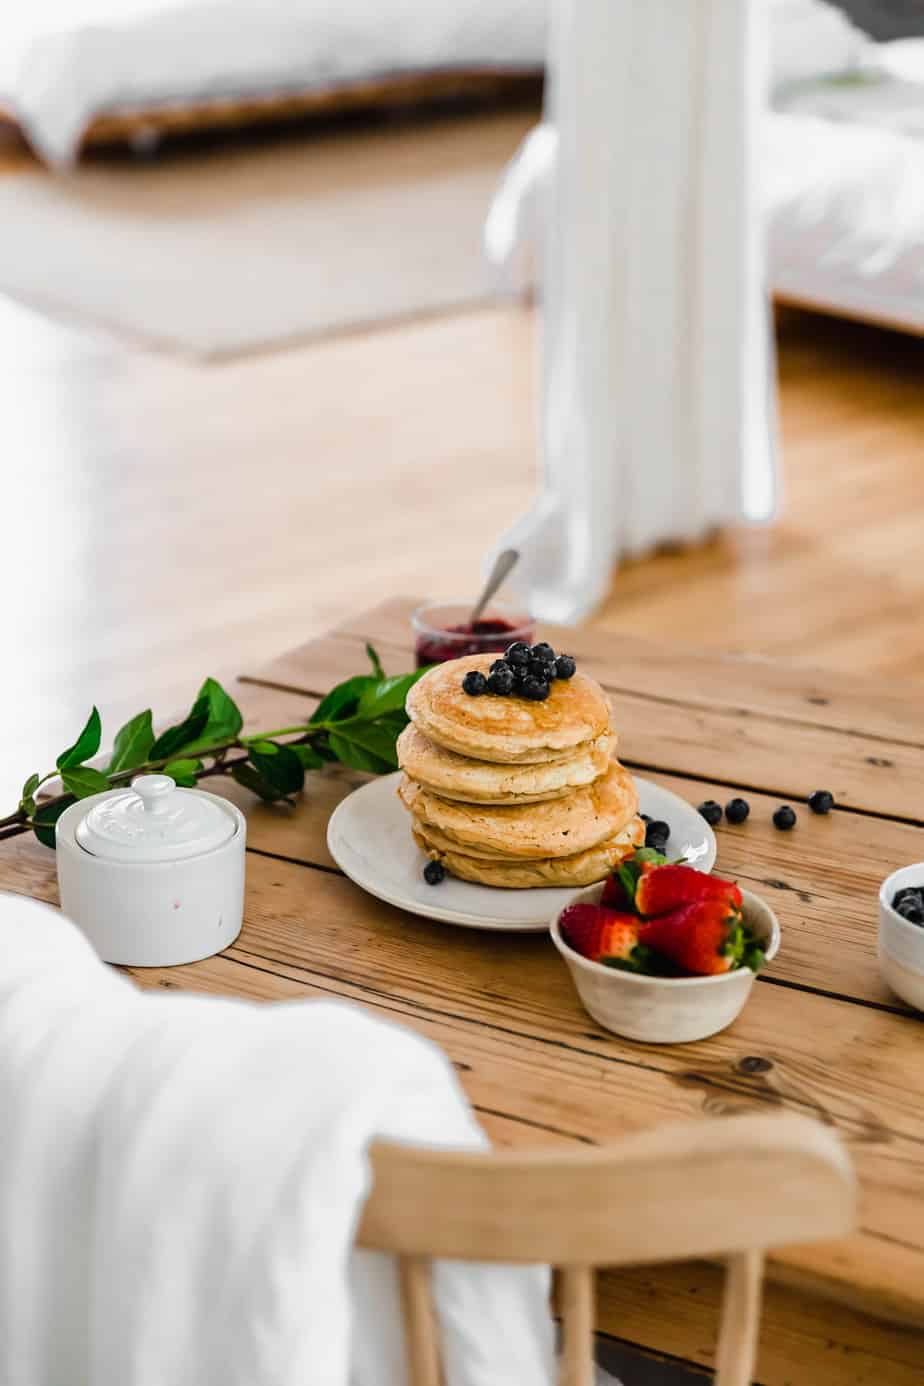 Pancakes on a wooden table with fresh berries.